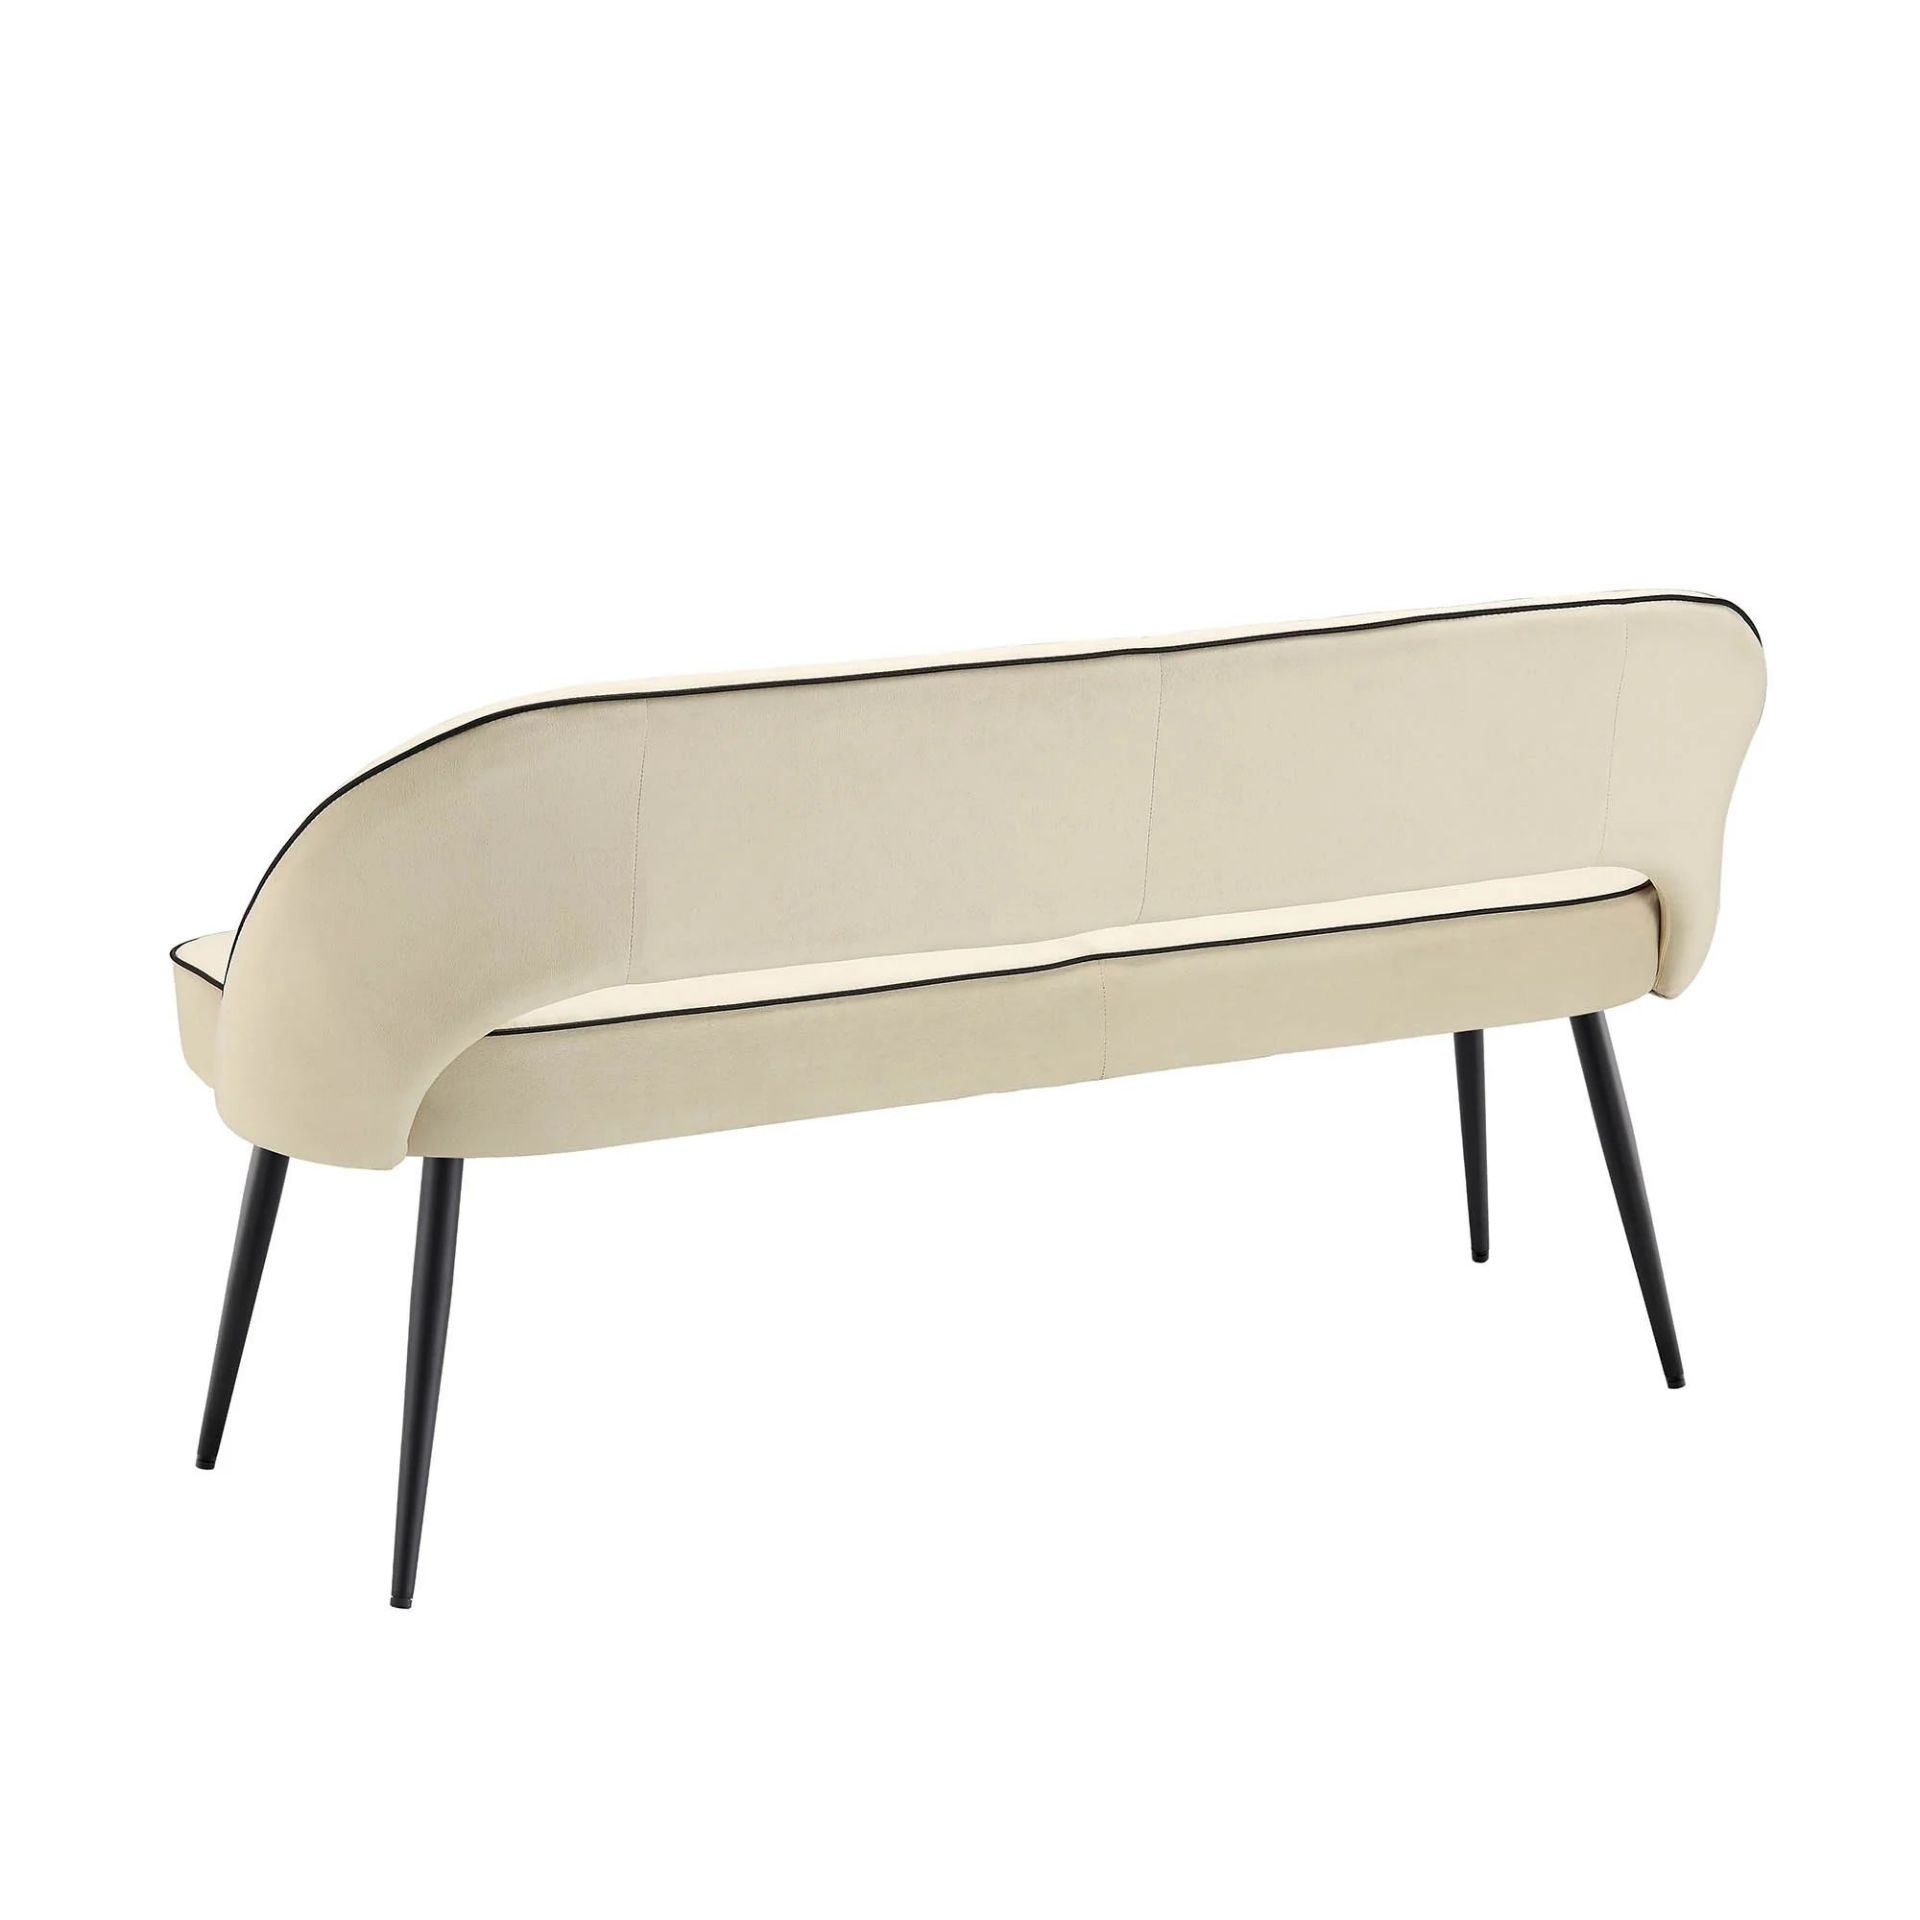 Oakley Champagne Velvet Upholstered 3 Seater Dining Bench with Contrast Piping. - R14. RRP £299. - Bild 2 aus 2